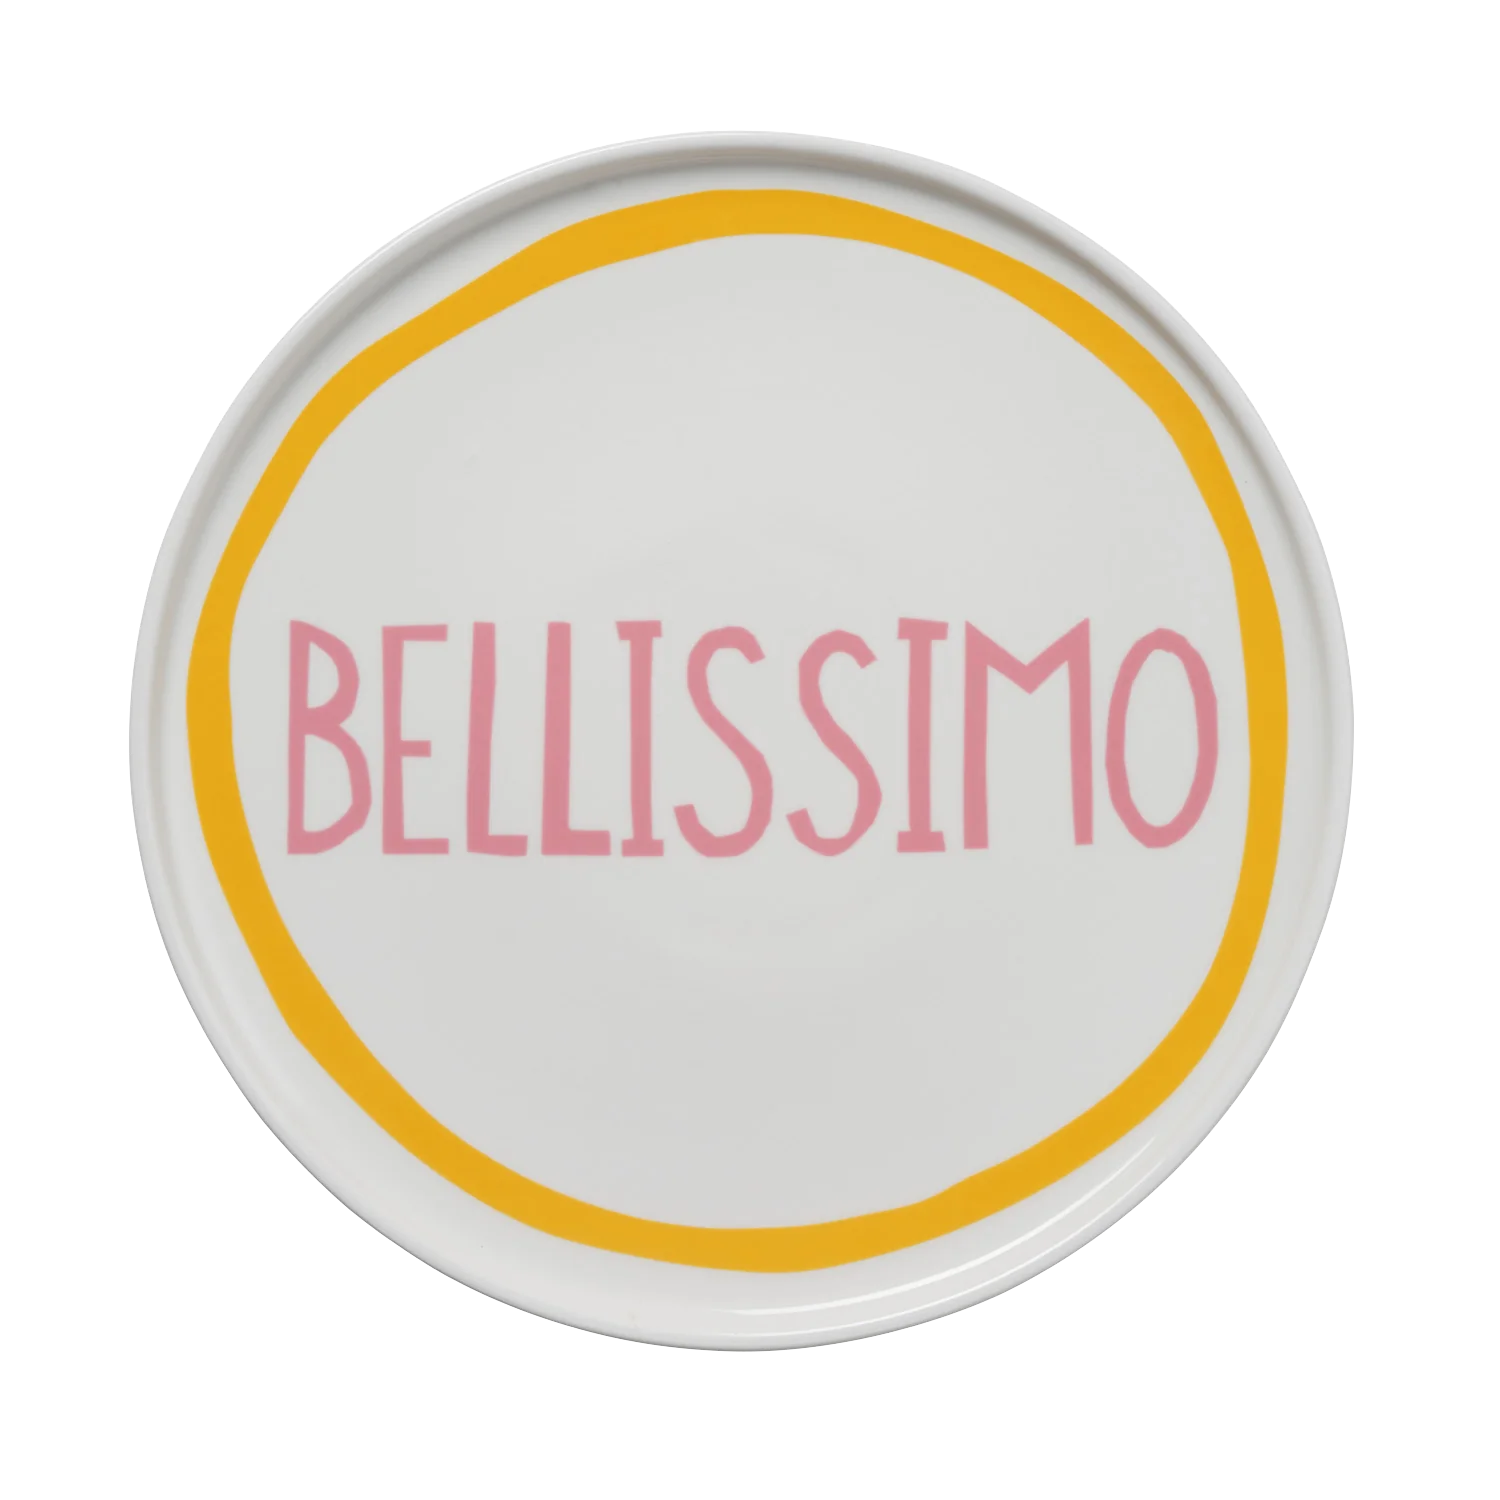 In The Roundhouse - Bellissimo Plate